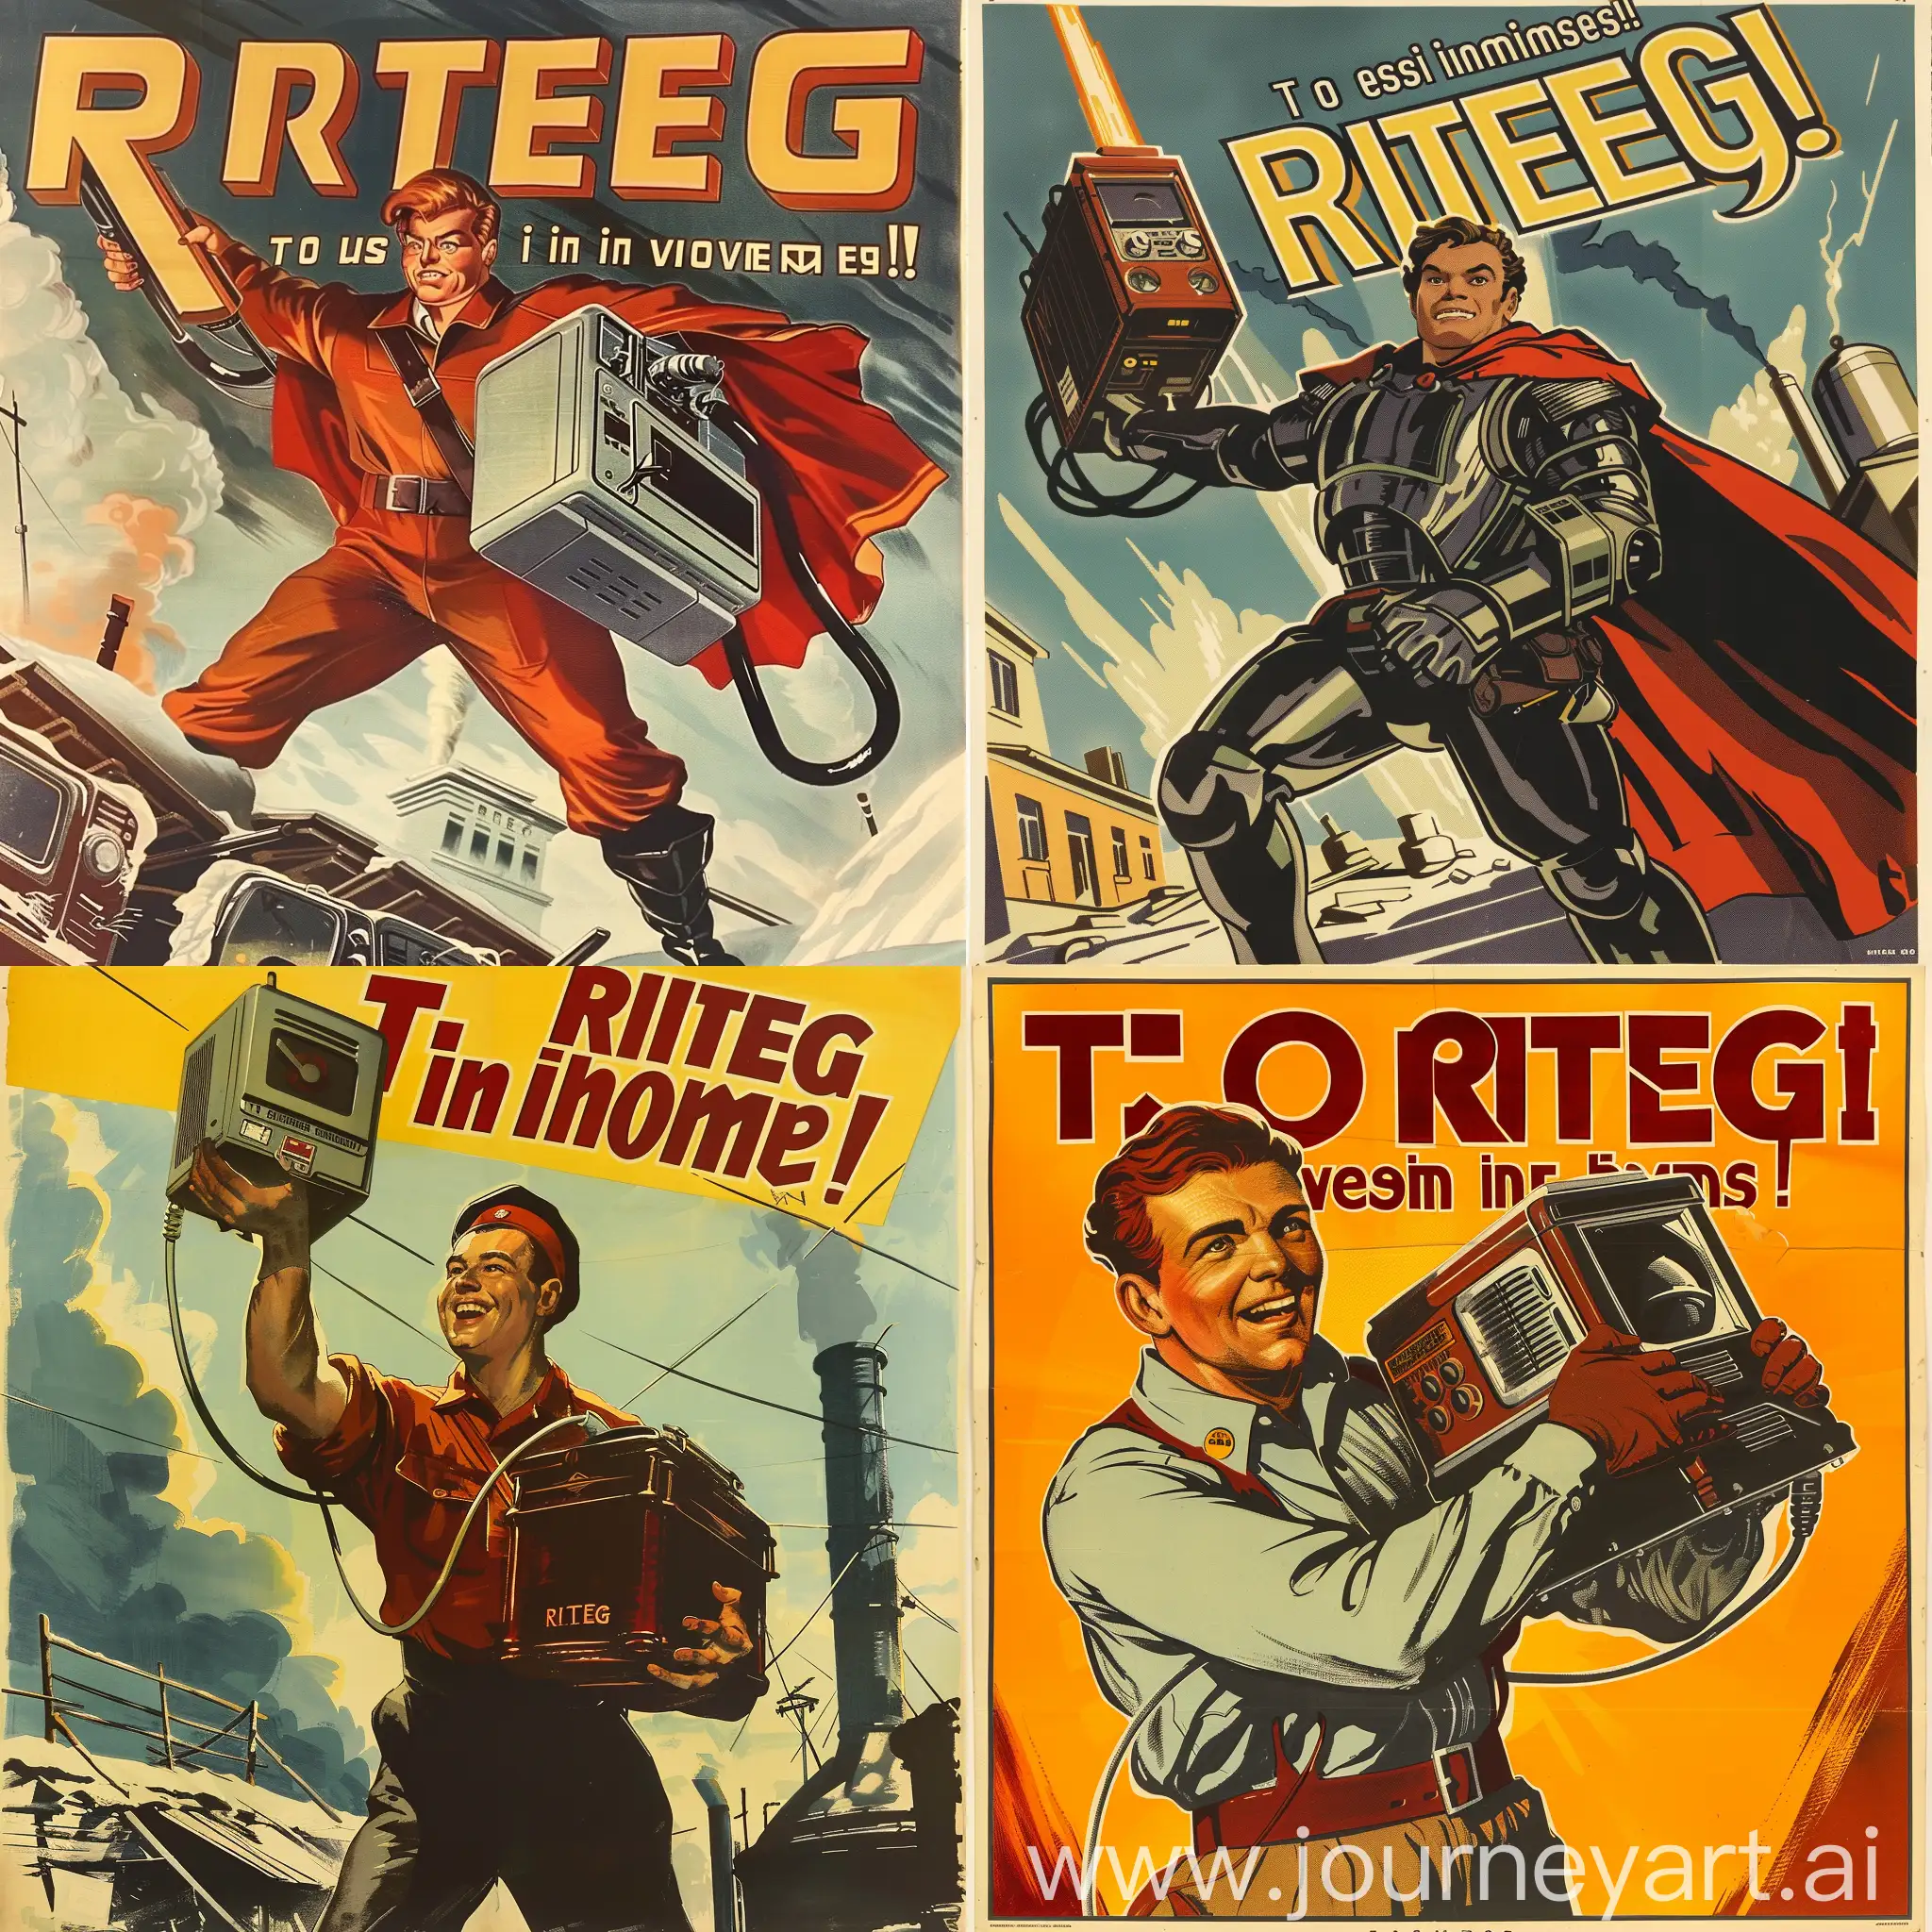 Create an authentic Soviet poster with the propagandist slogan "To RITEG in every home!" This poster should inspire people to use electrical appliances in everyday life and emphasize the importance of energy conservation. Visually, the poster should reflect the style of Soviet propaganda: the use of bright colors, heroic images, large letters with a slogan reminding of ideology and goals.